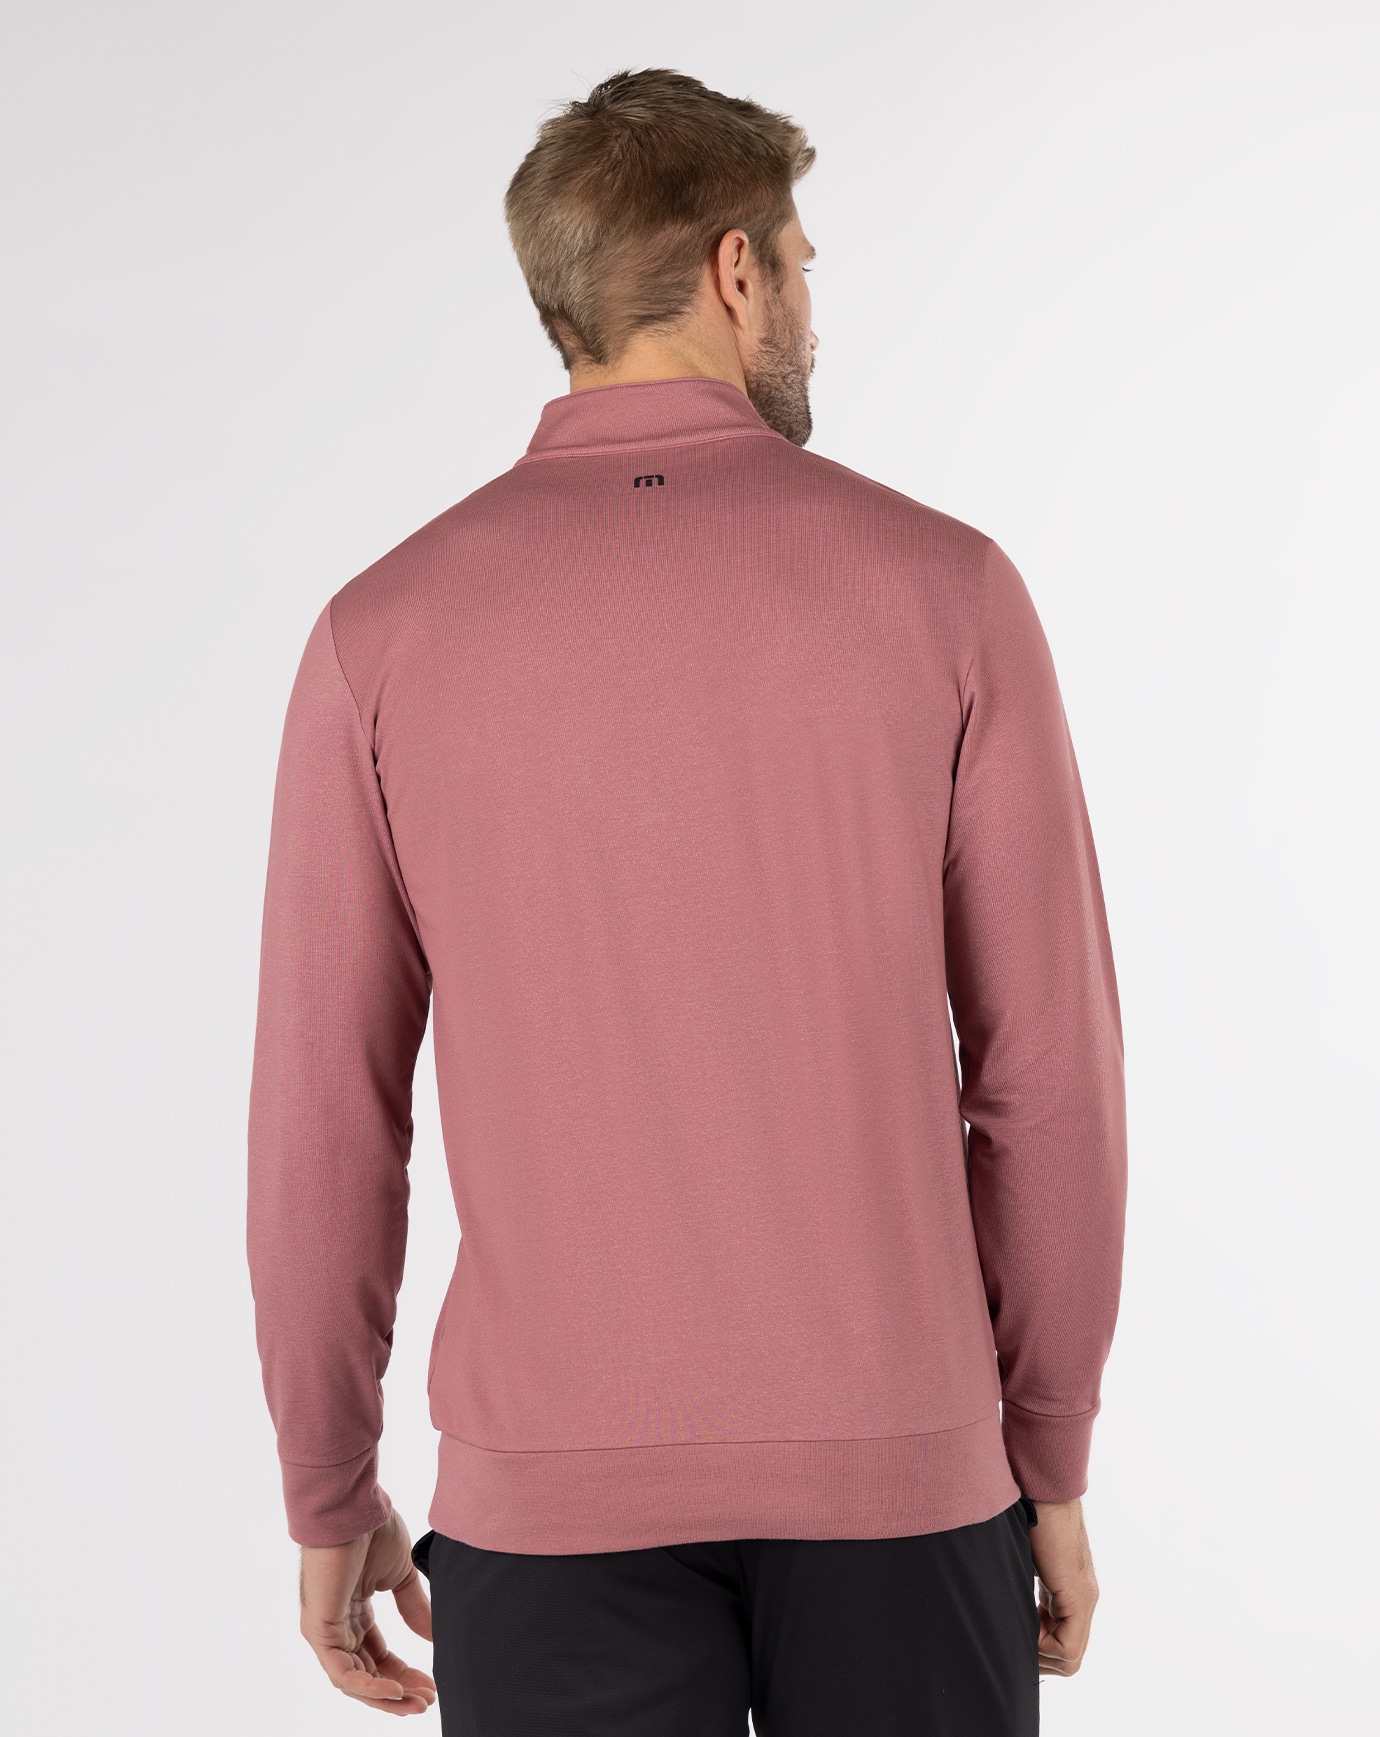 IN THE LINE UP QUARTER ZIP Image Thumbnail 3